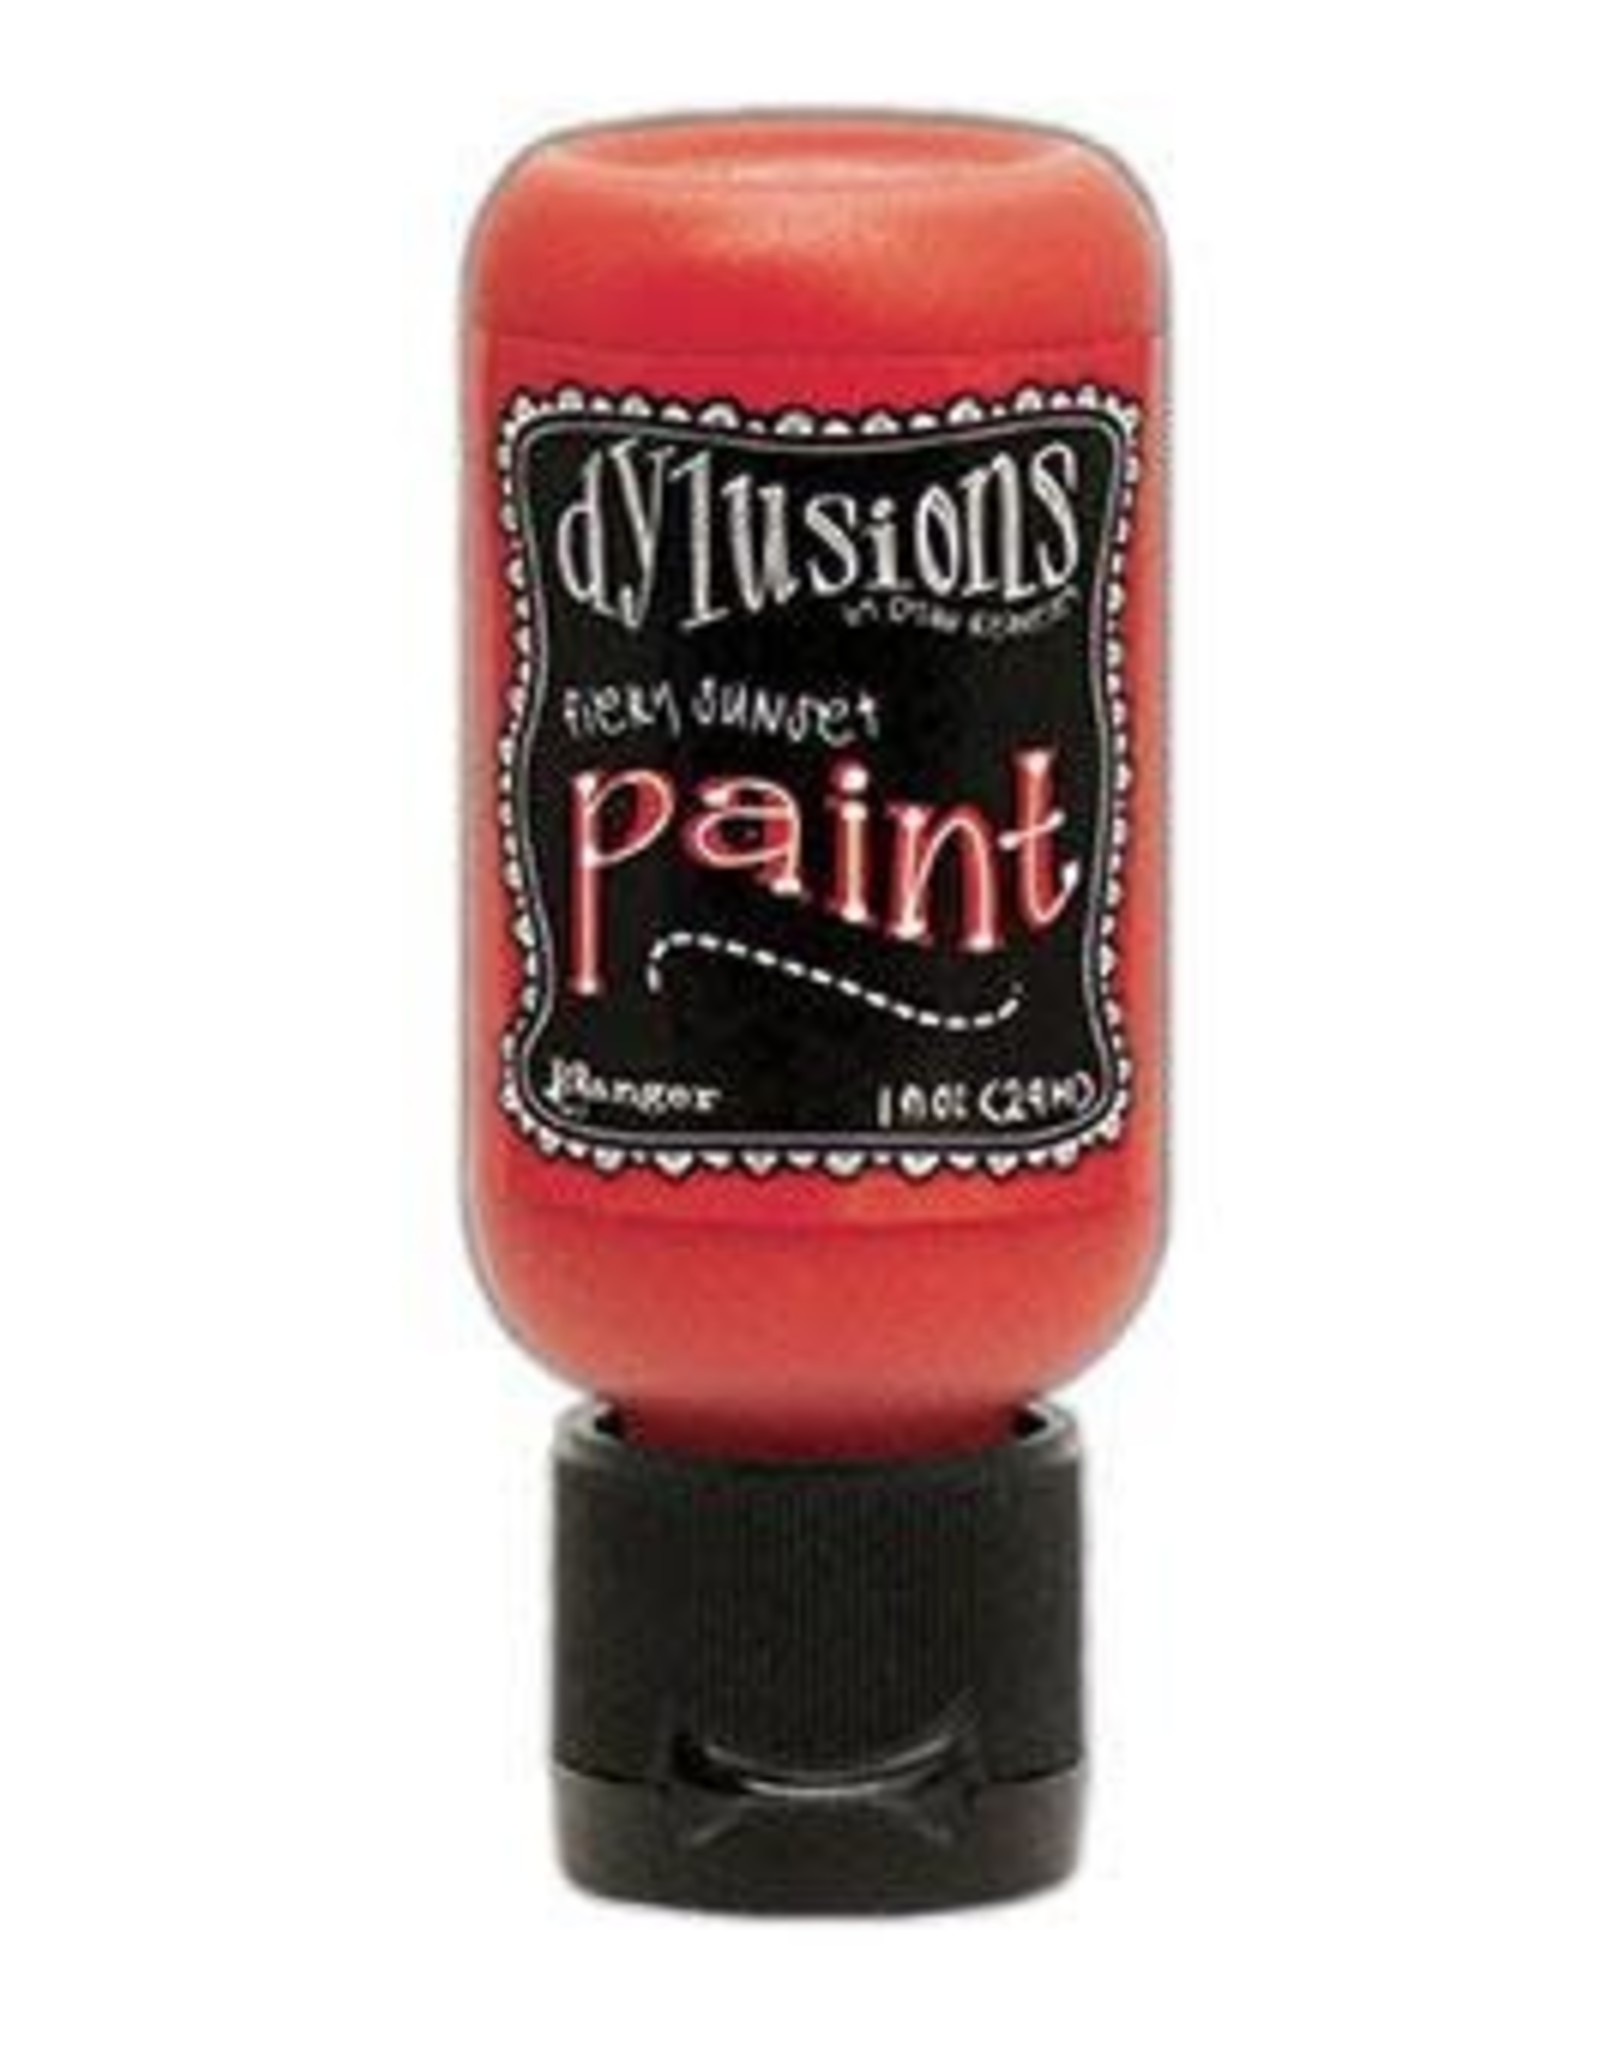 Dylusions DYL Paint 1 oz Fiery Sunset